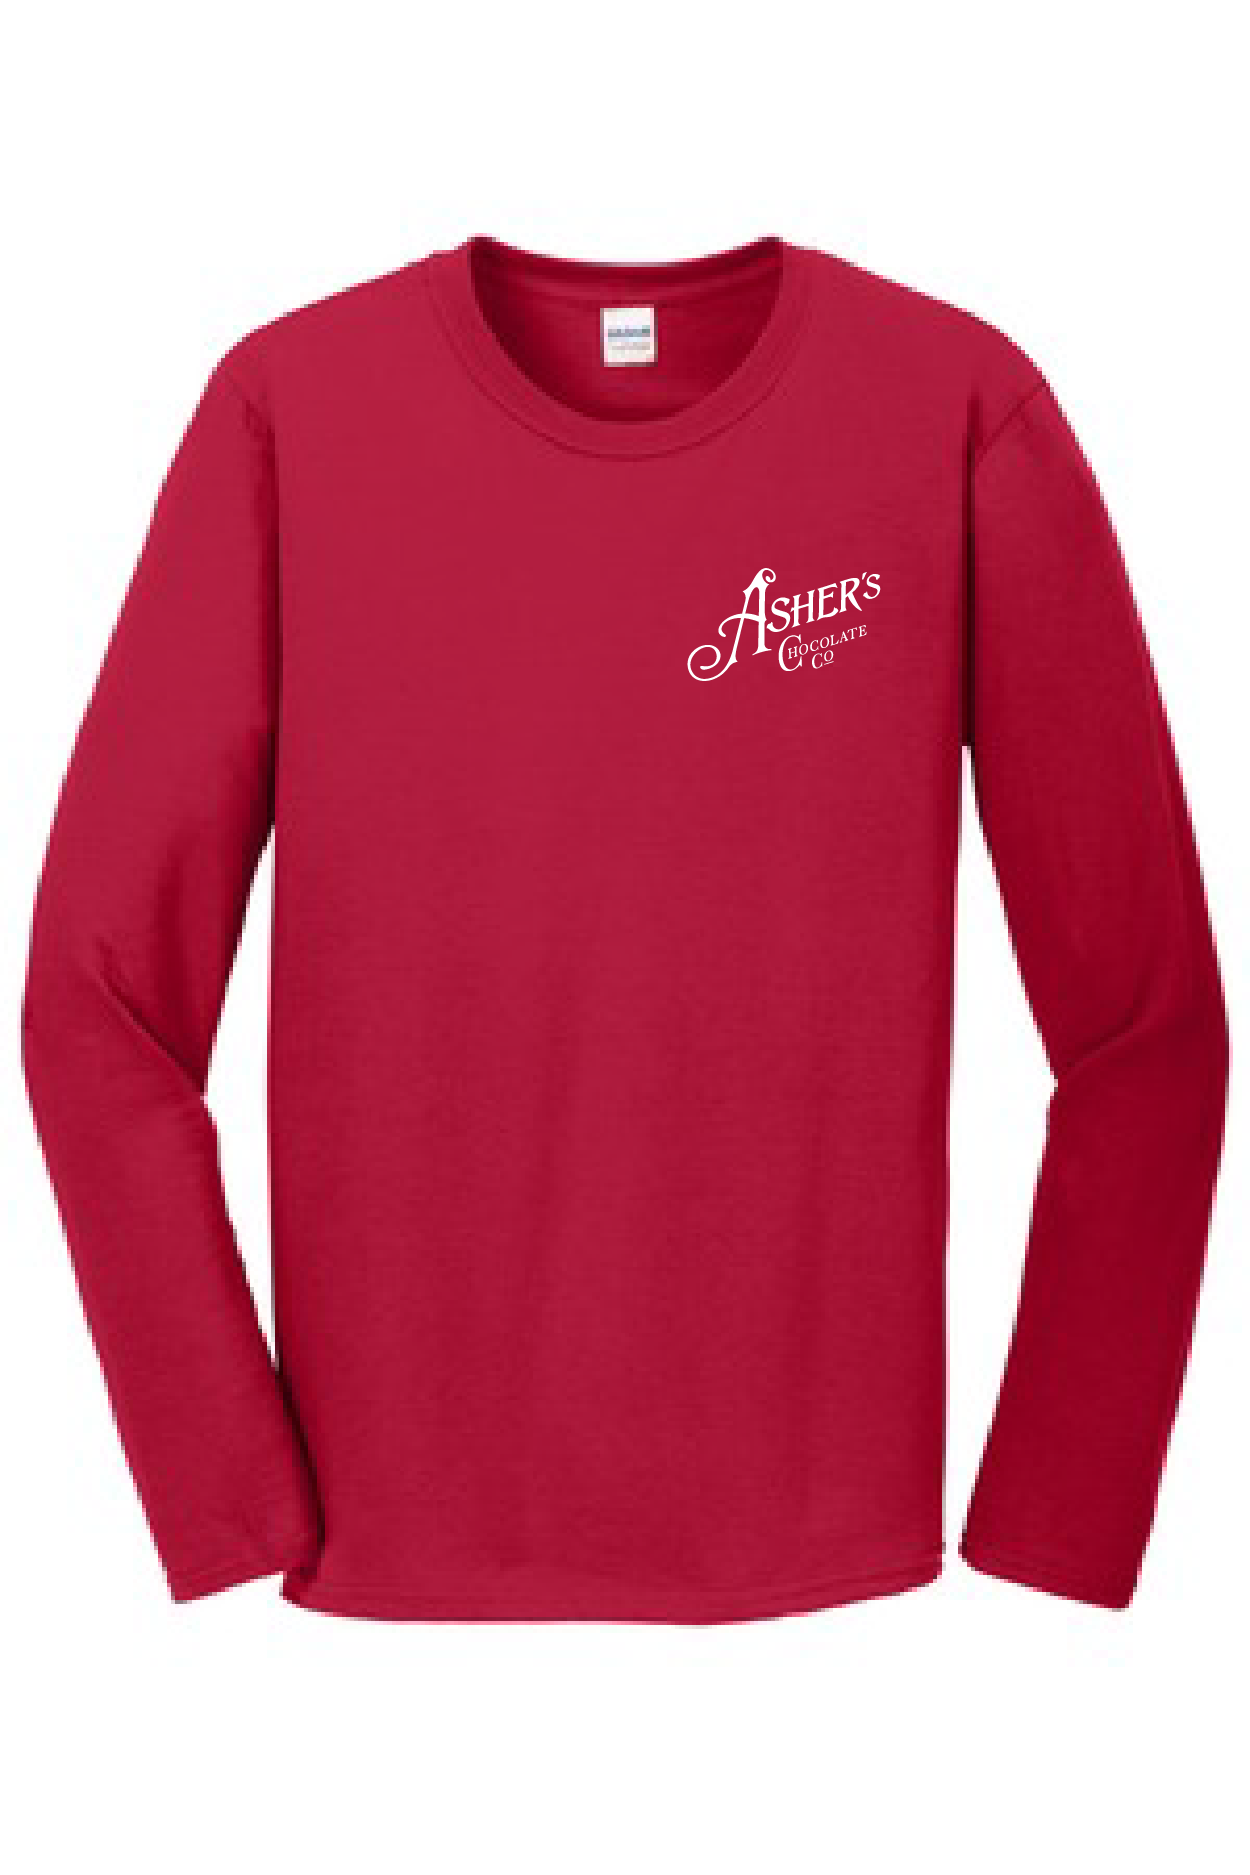 Adult Red Long Sleeve T-Shirt-Size XL - Asher's Chocolate Co.